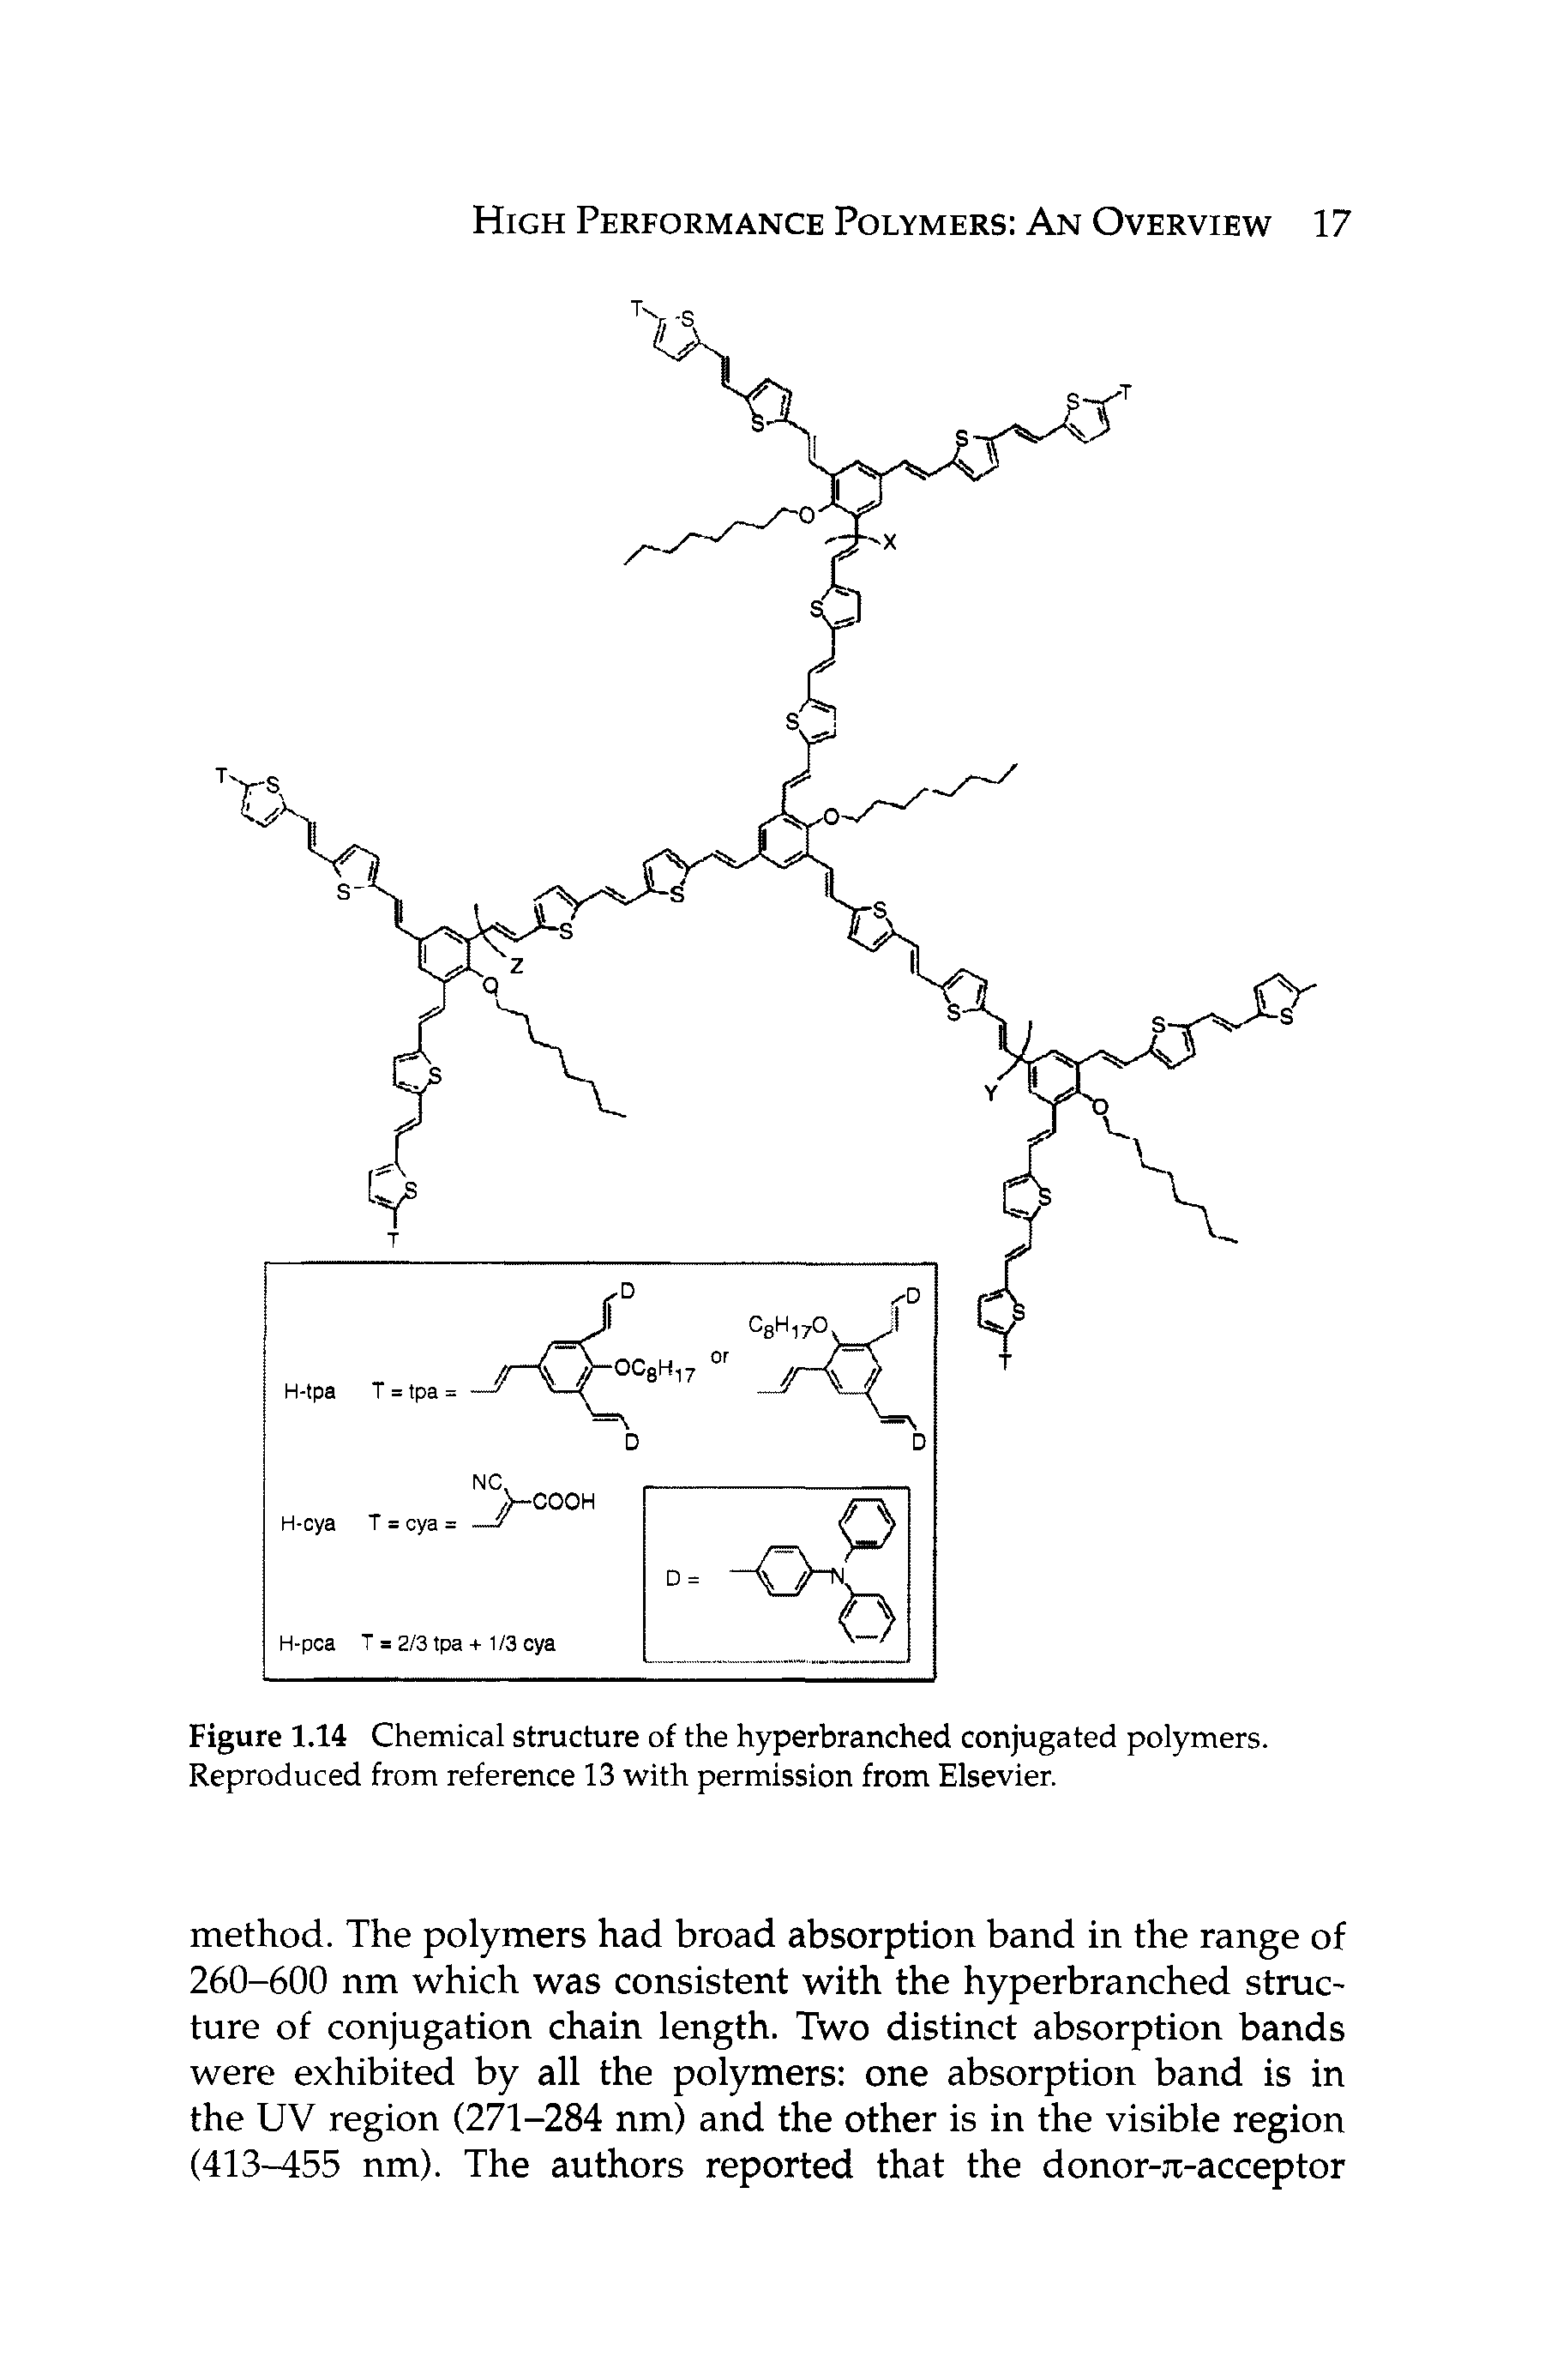 Figure 1.14 Chemical structure of the hyperbranched conjugated polymers. Reproduced from reference 13 with permission from Elsevier.